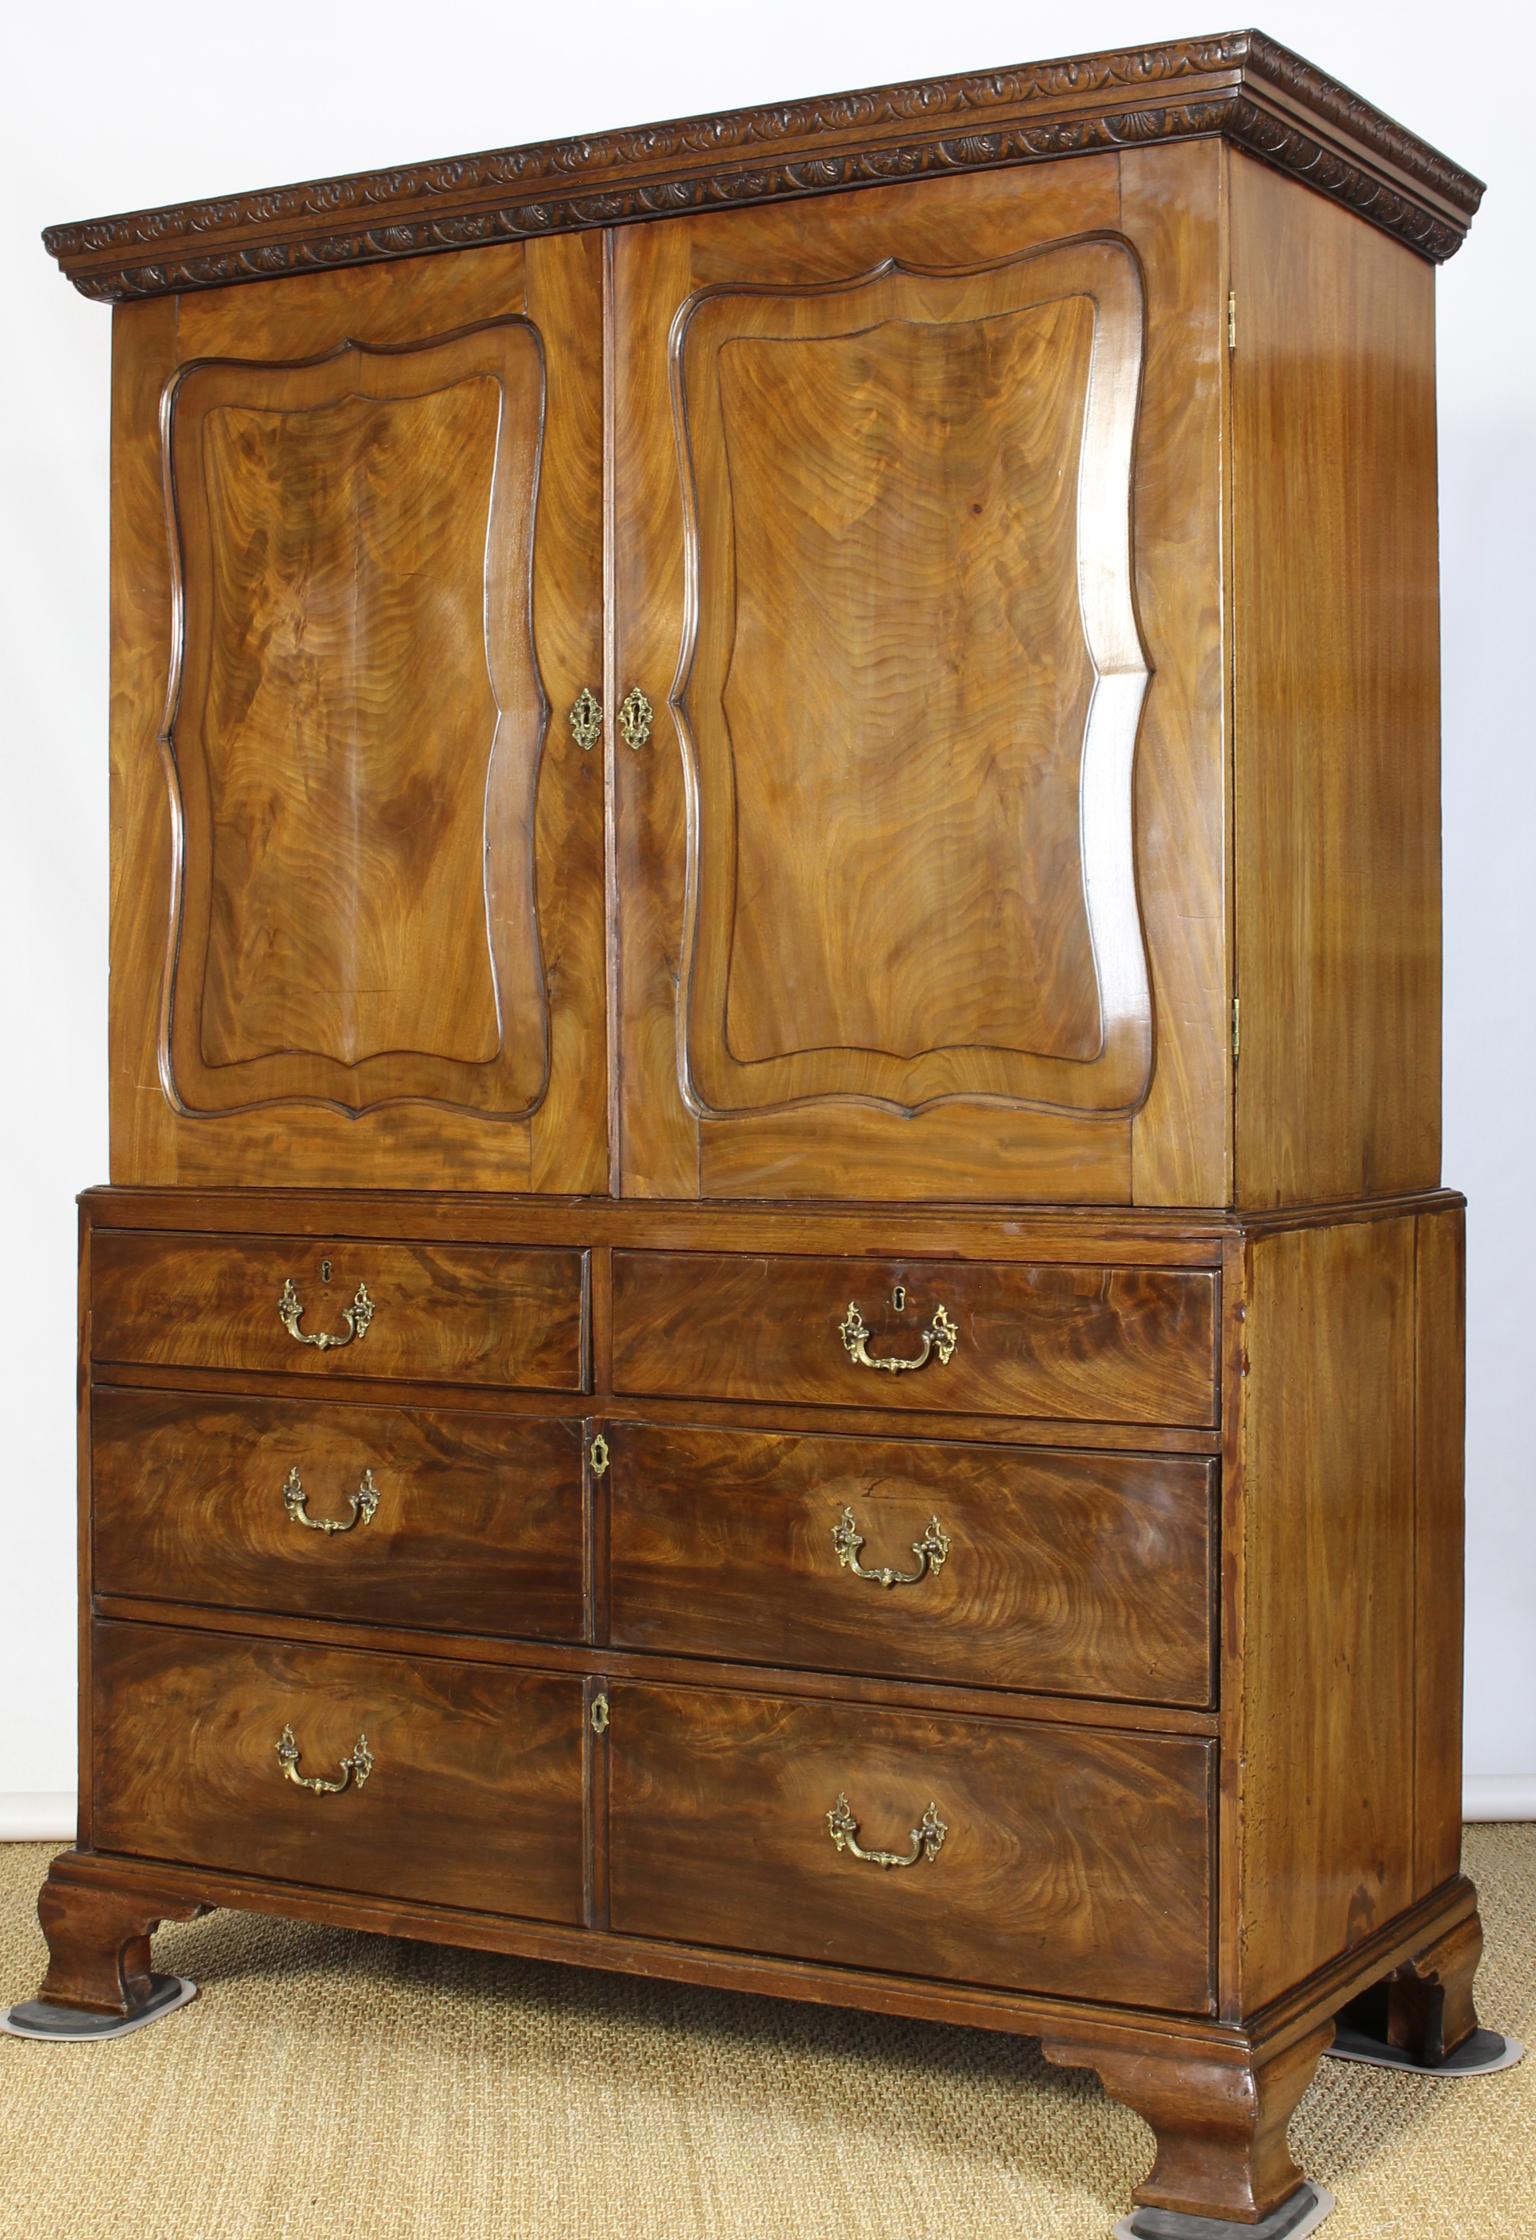 An elegant George III mahogany two part linen press with elegantly carved scalloped doors over four drawers supported on ogee bracket scroll feet.